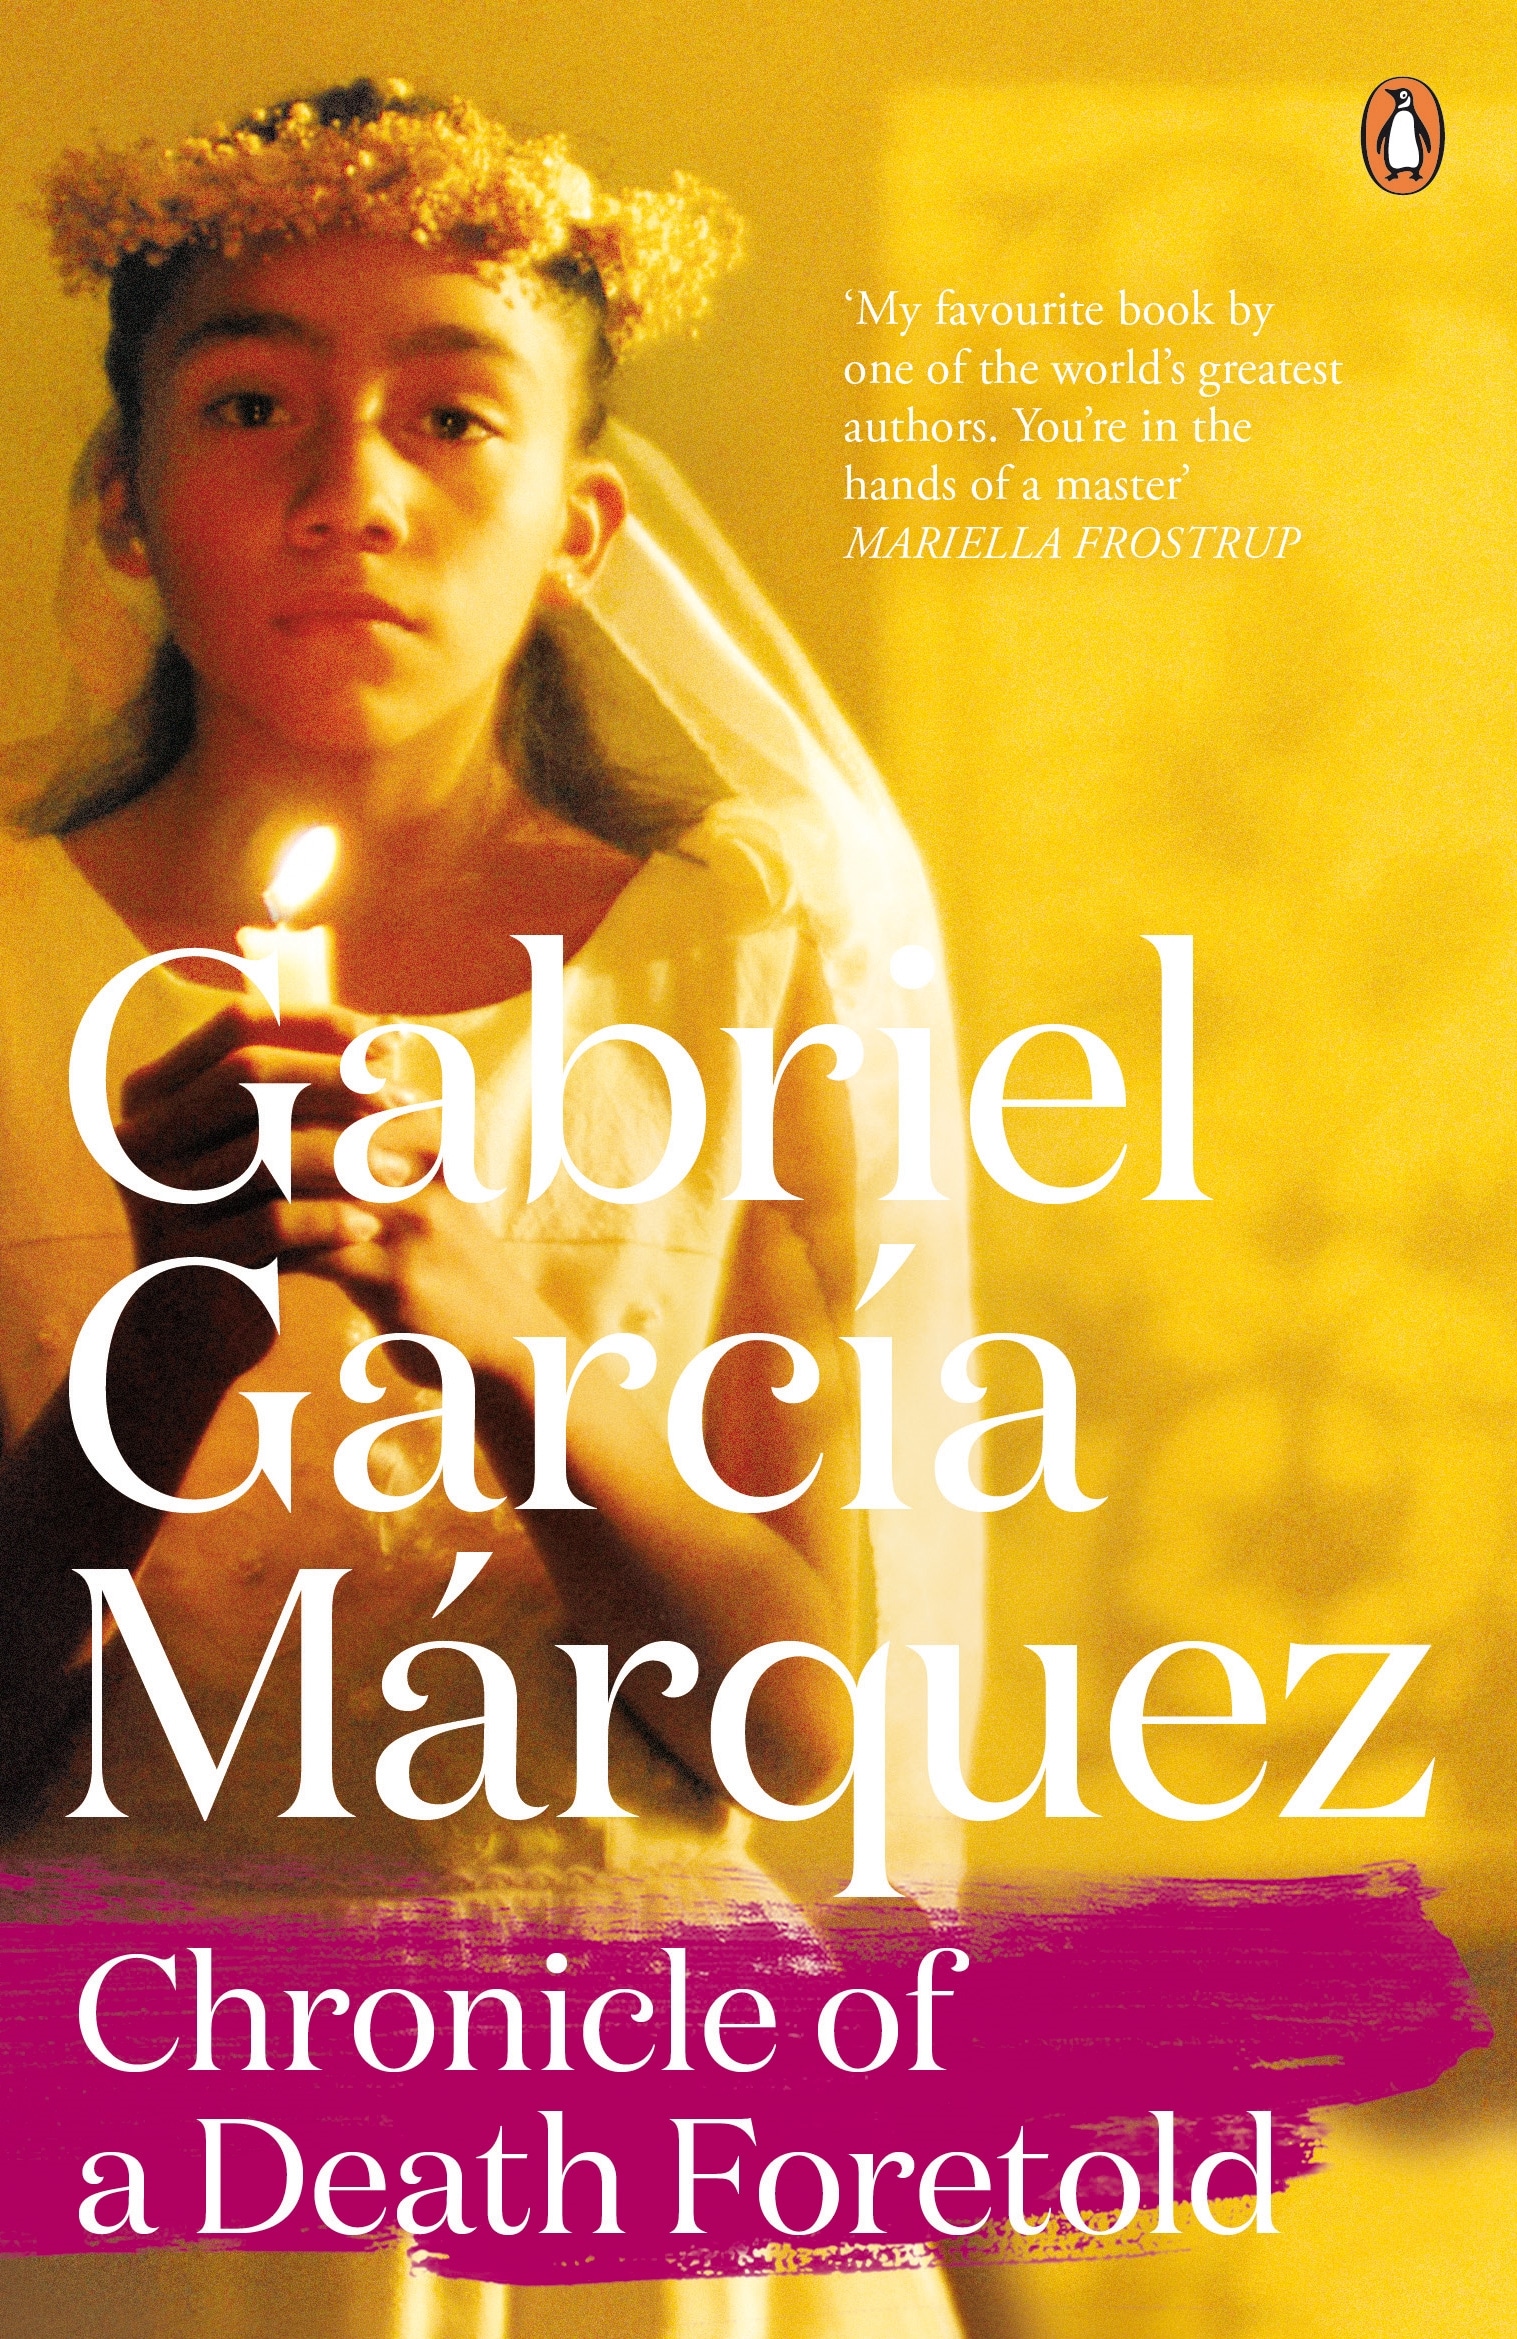 Book “Chronicle of a Death Foretold” by Gabriel Garcia Marquez — March 6, 2014